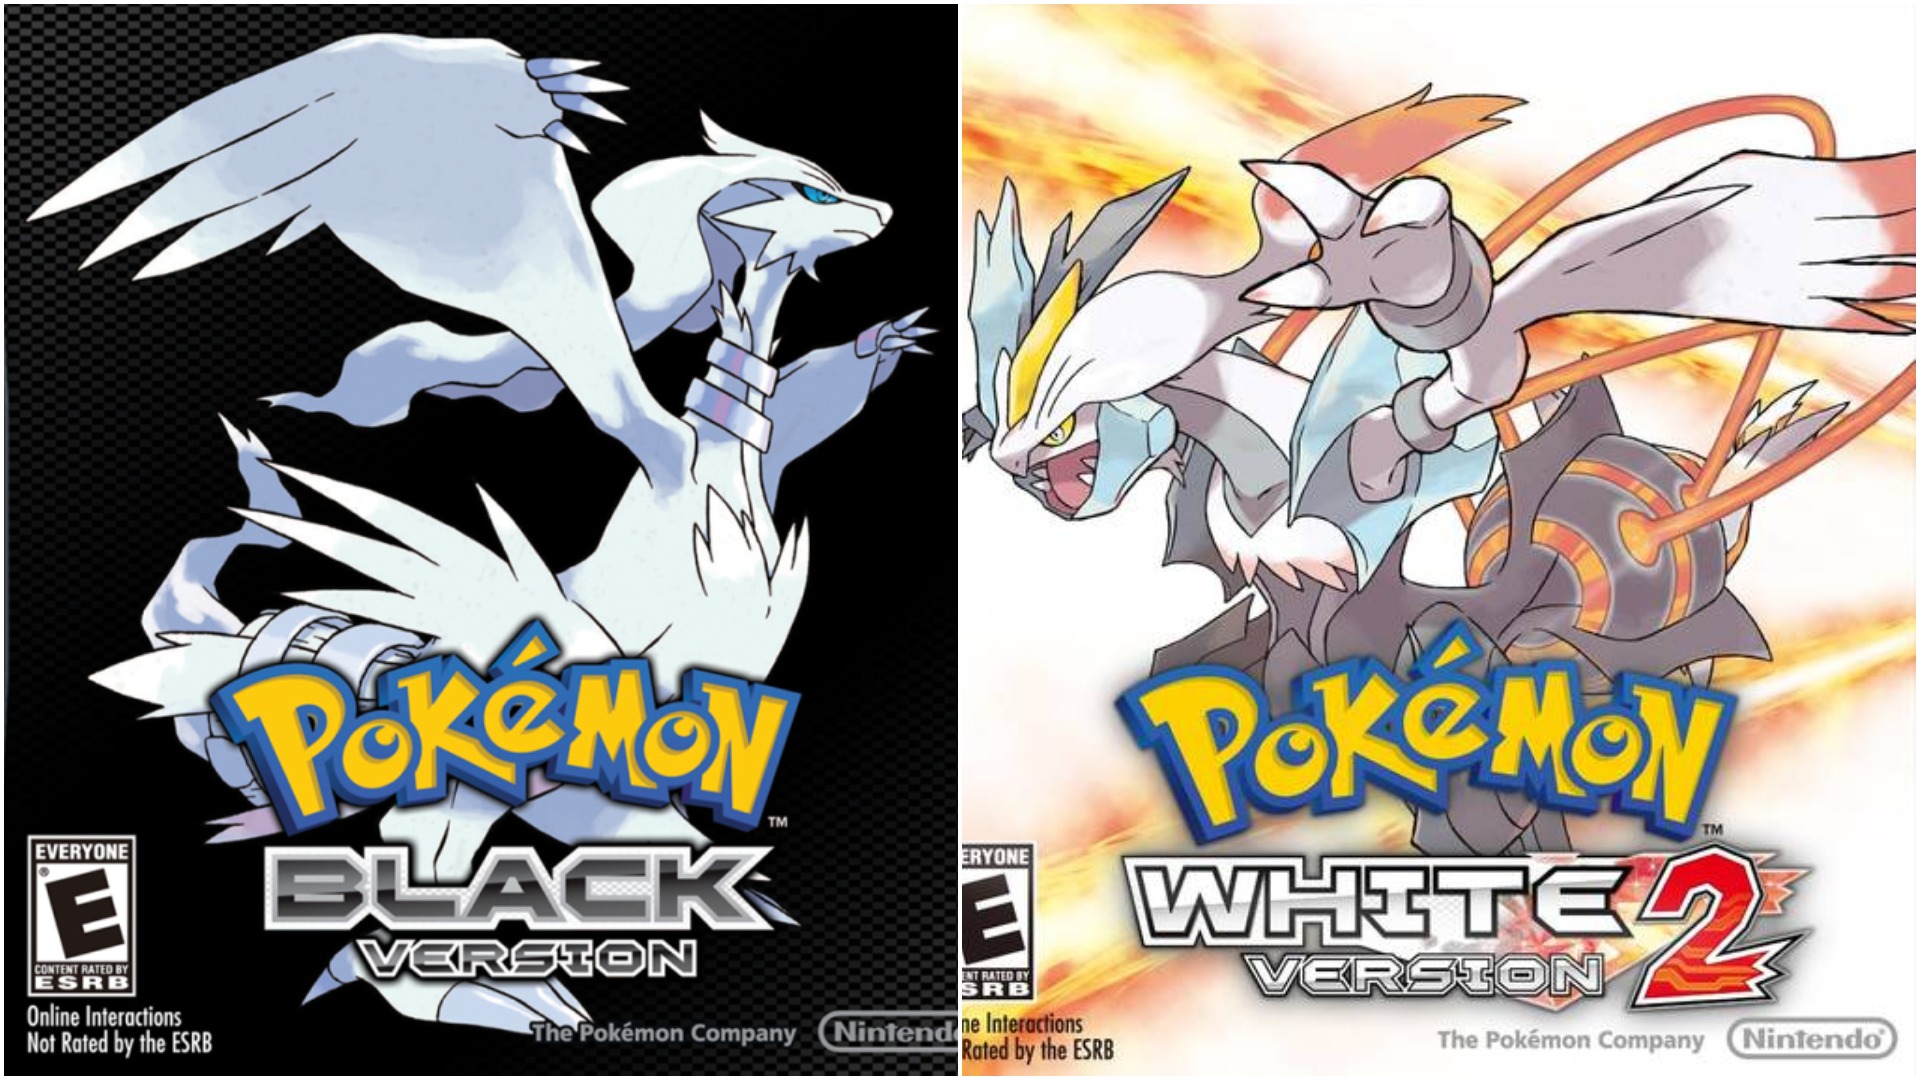 5 highest-rated Pokemon games of all time, ranked